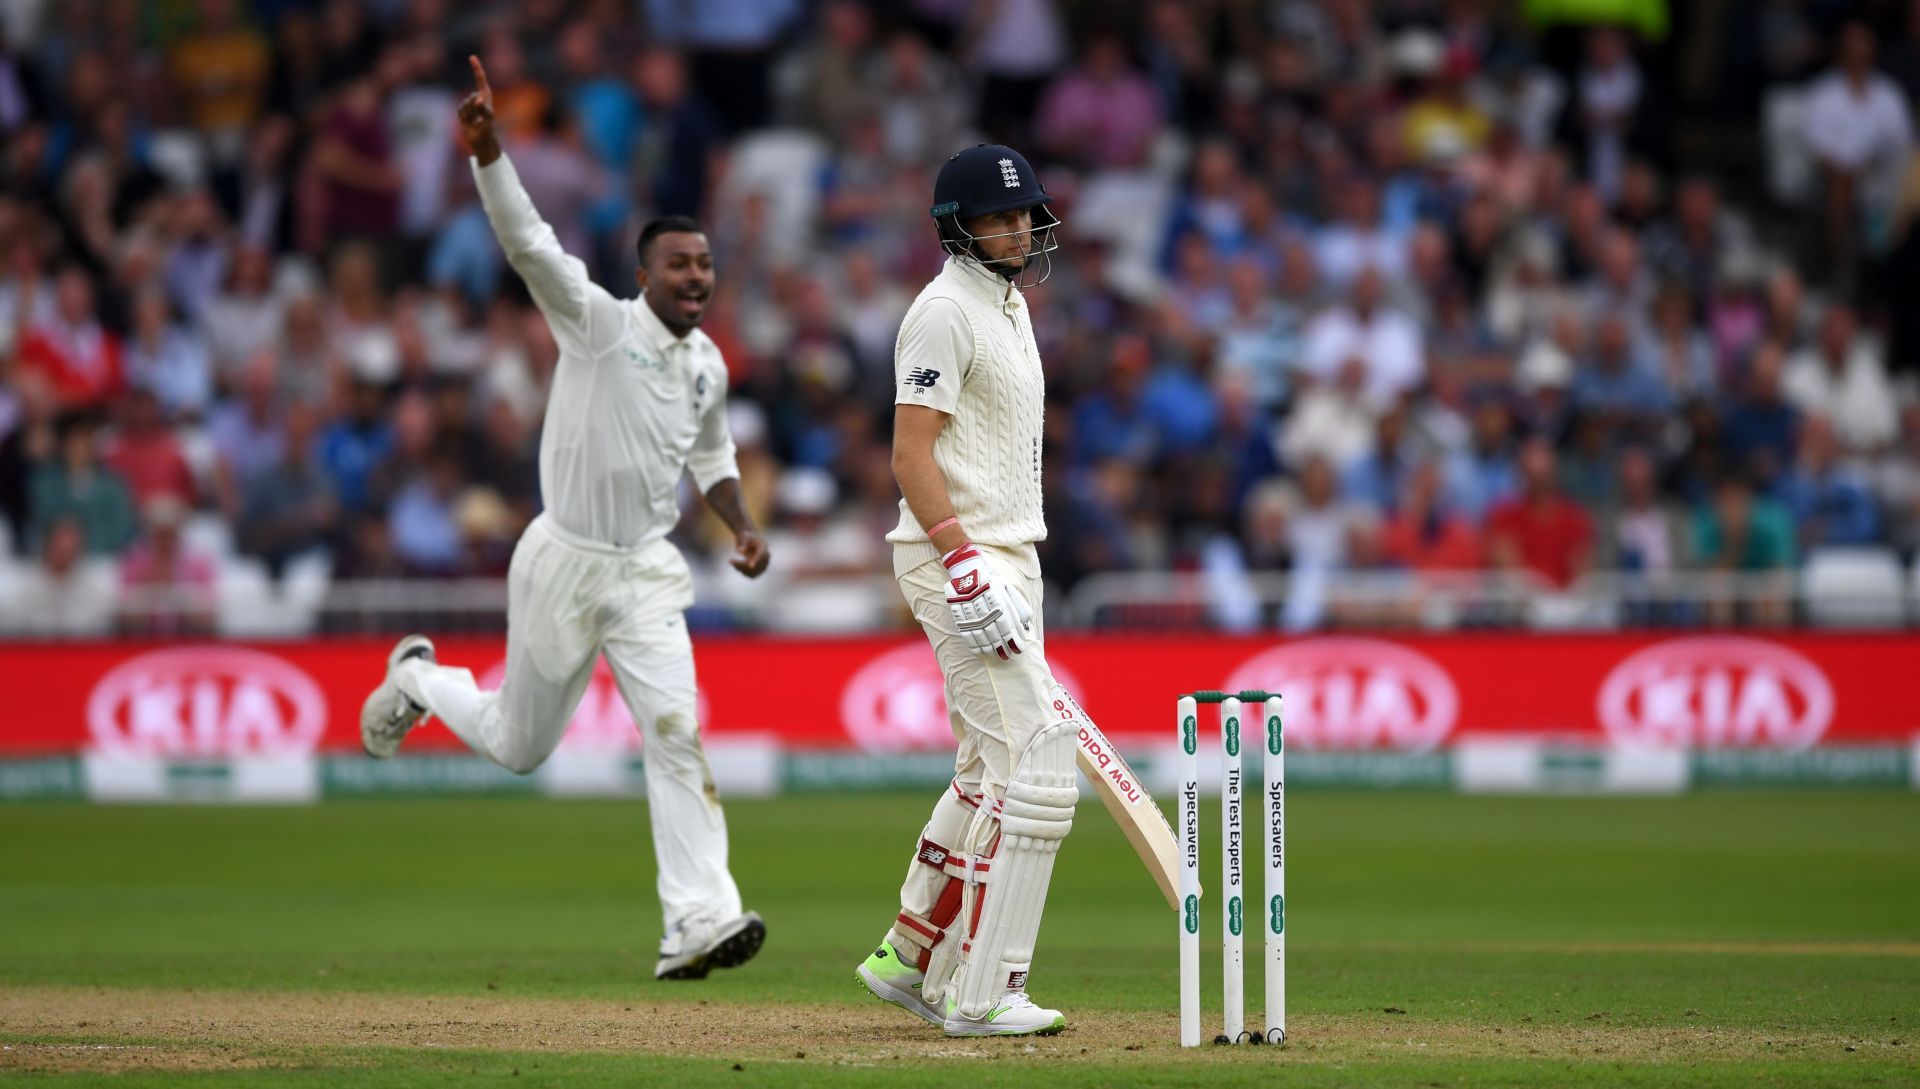 With Hardik Pandya wreaking havoc, Joe Root&#039;s decision to field first turned pear-shaped.\